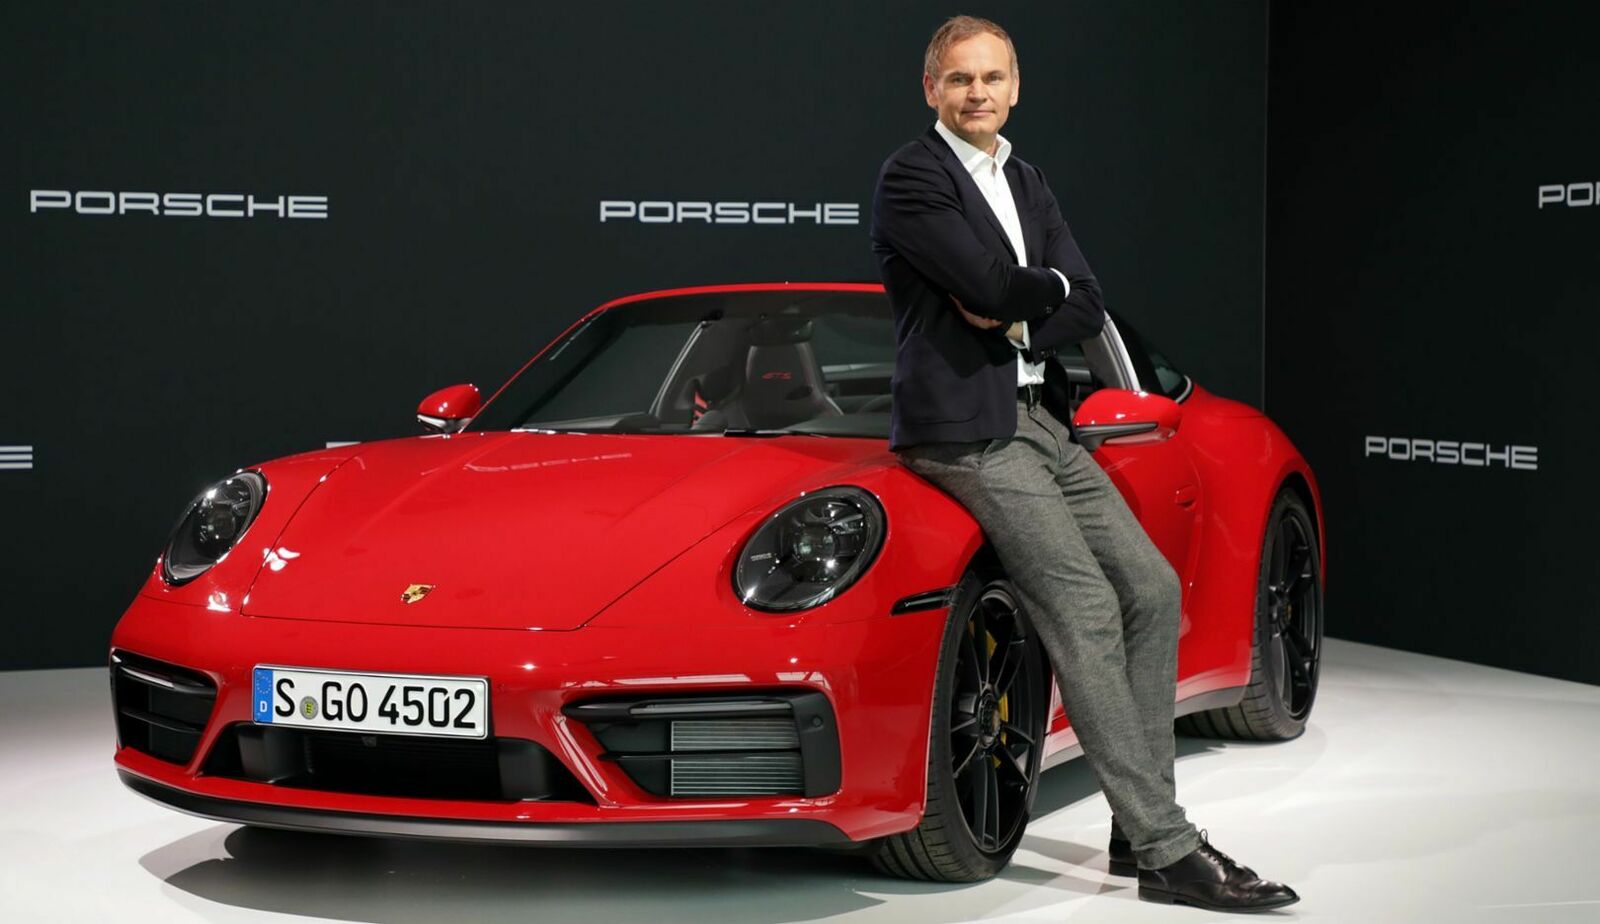 Oliver Blume leans against a red Porsche 911 and looks into the camera